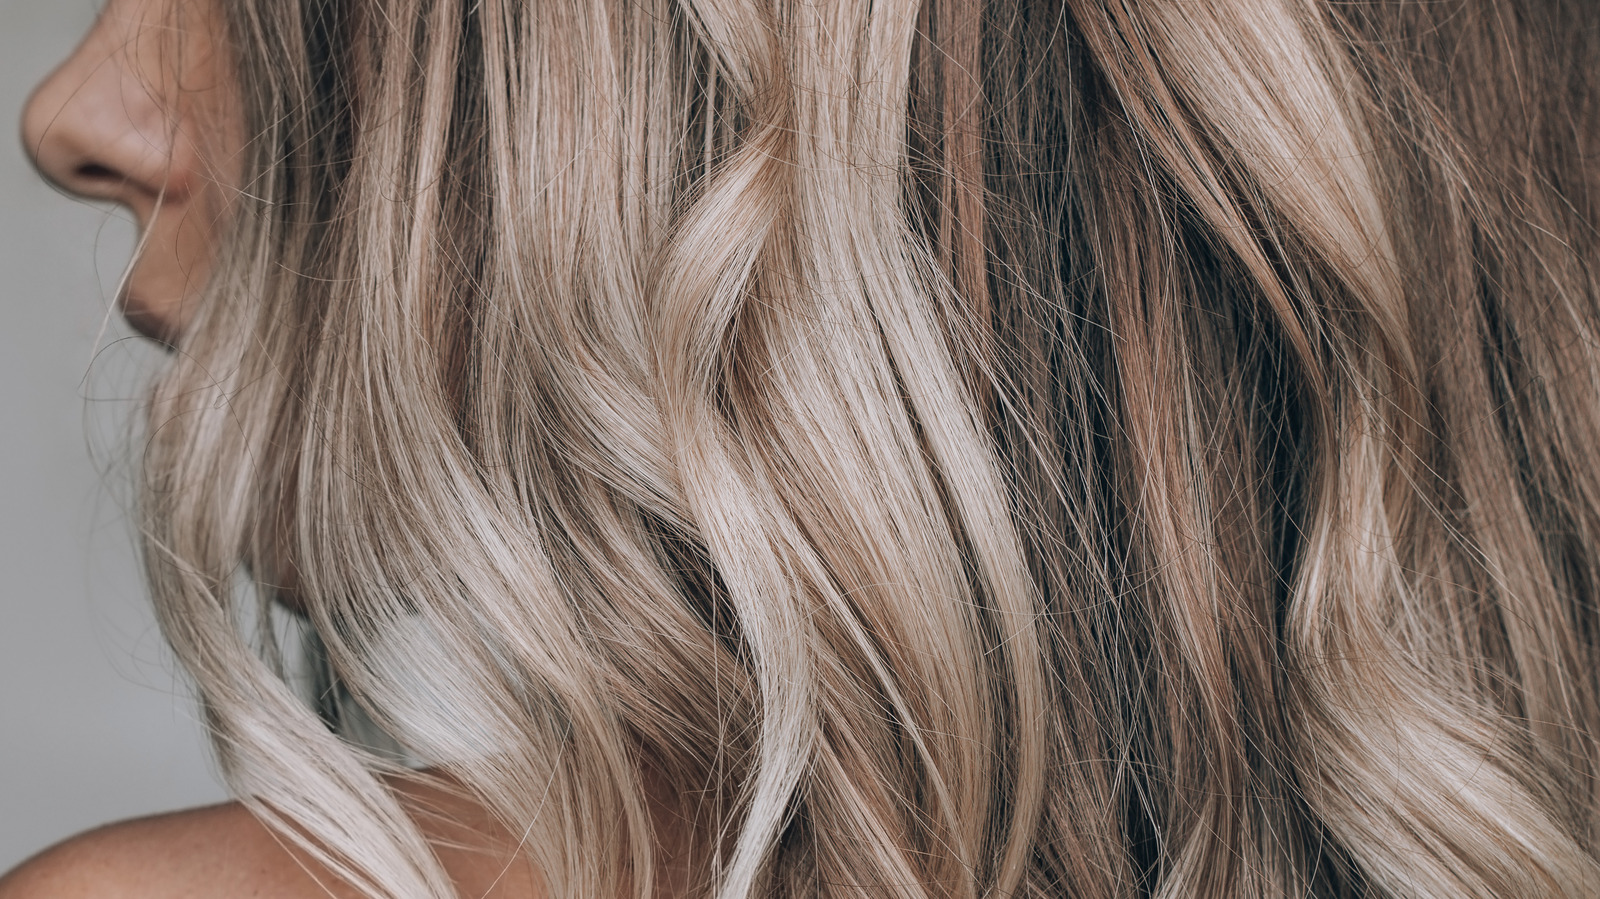 How To Do Hair Highlighting At Home? All You Need To Know